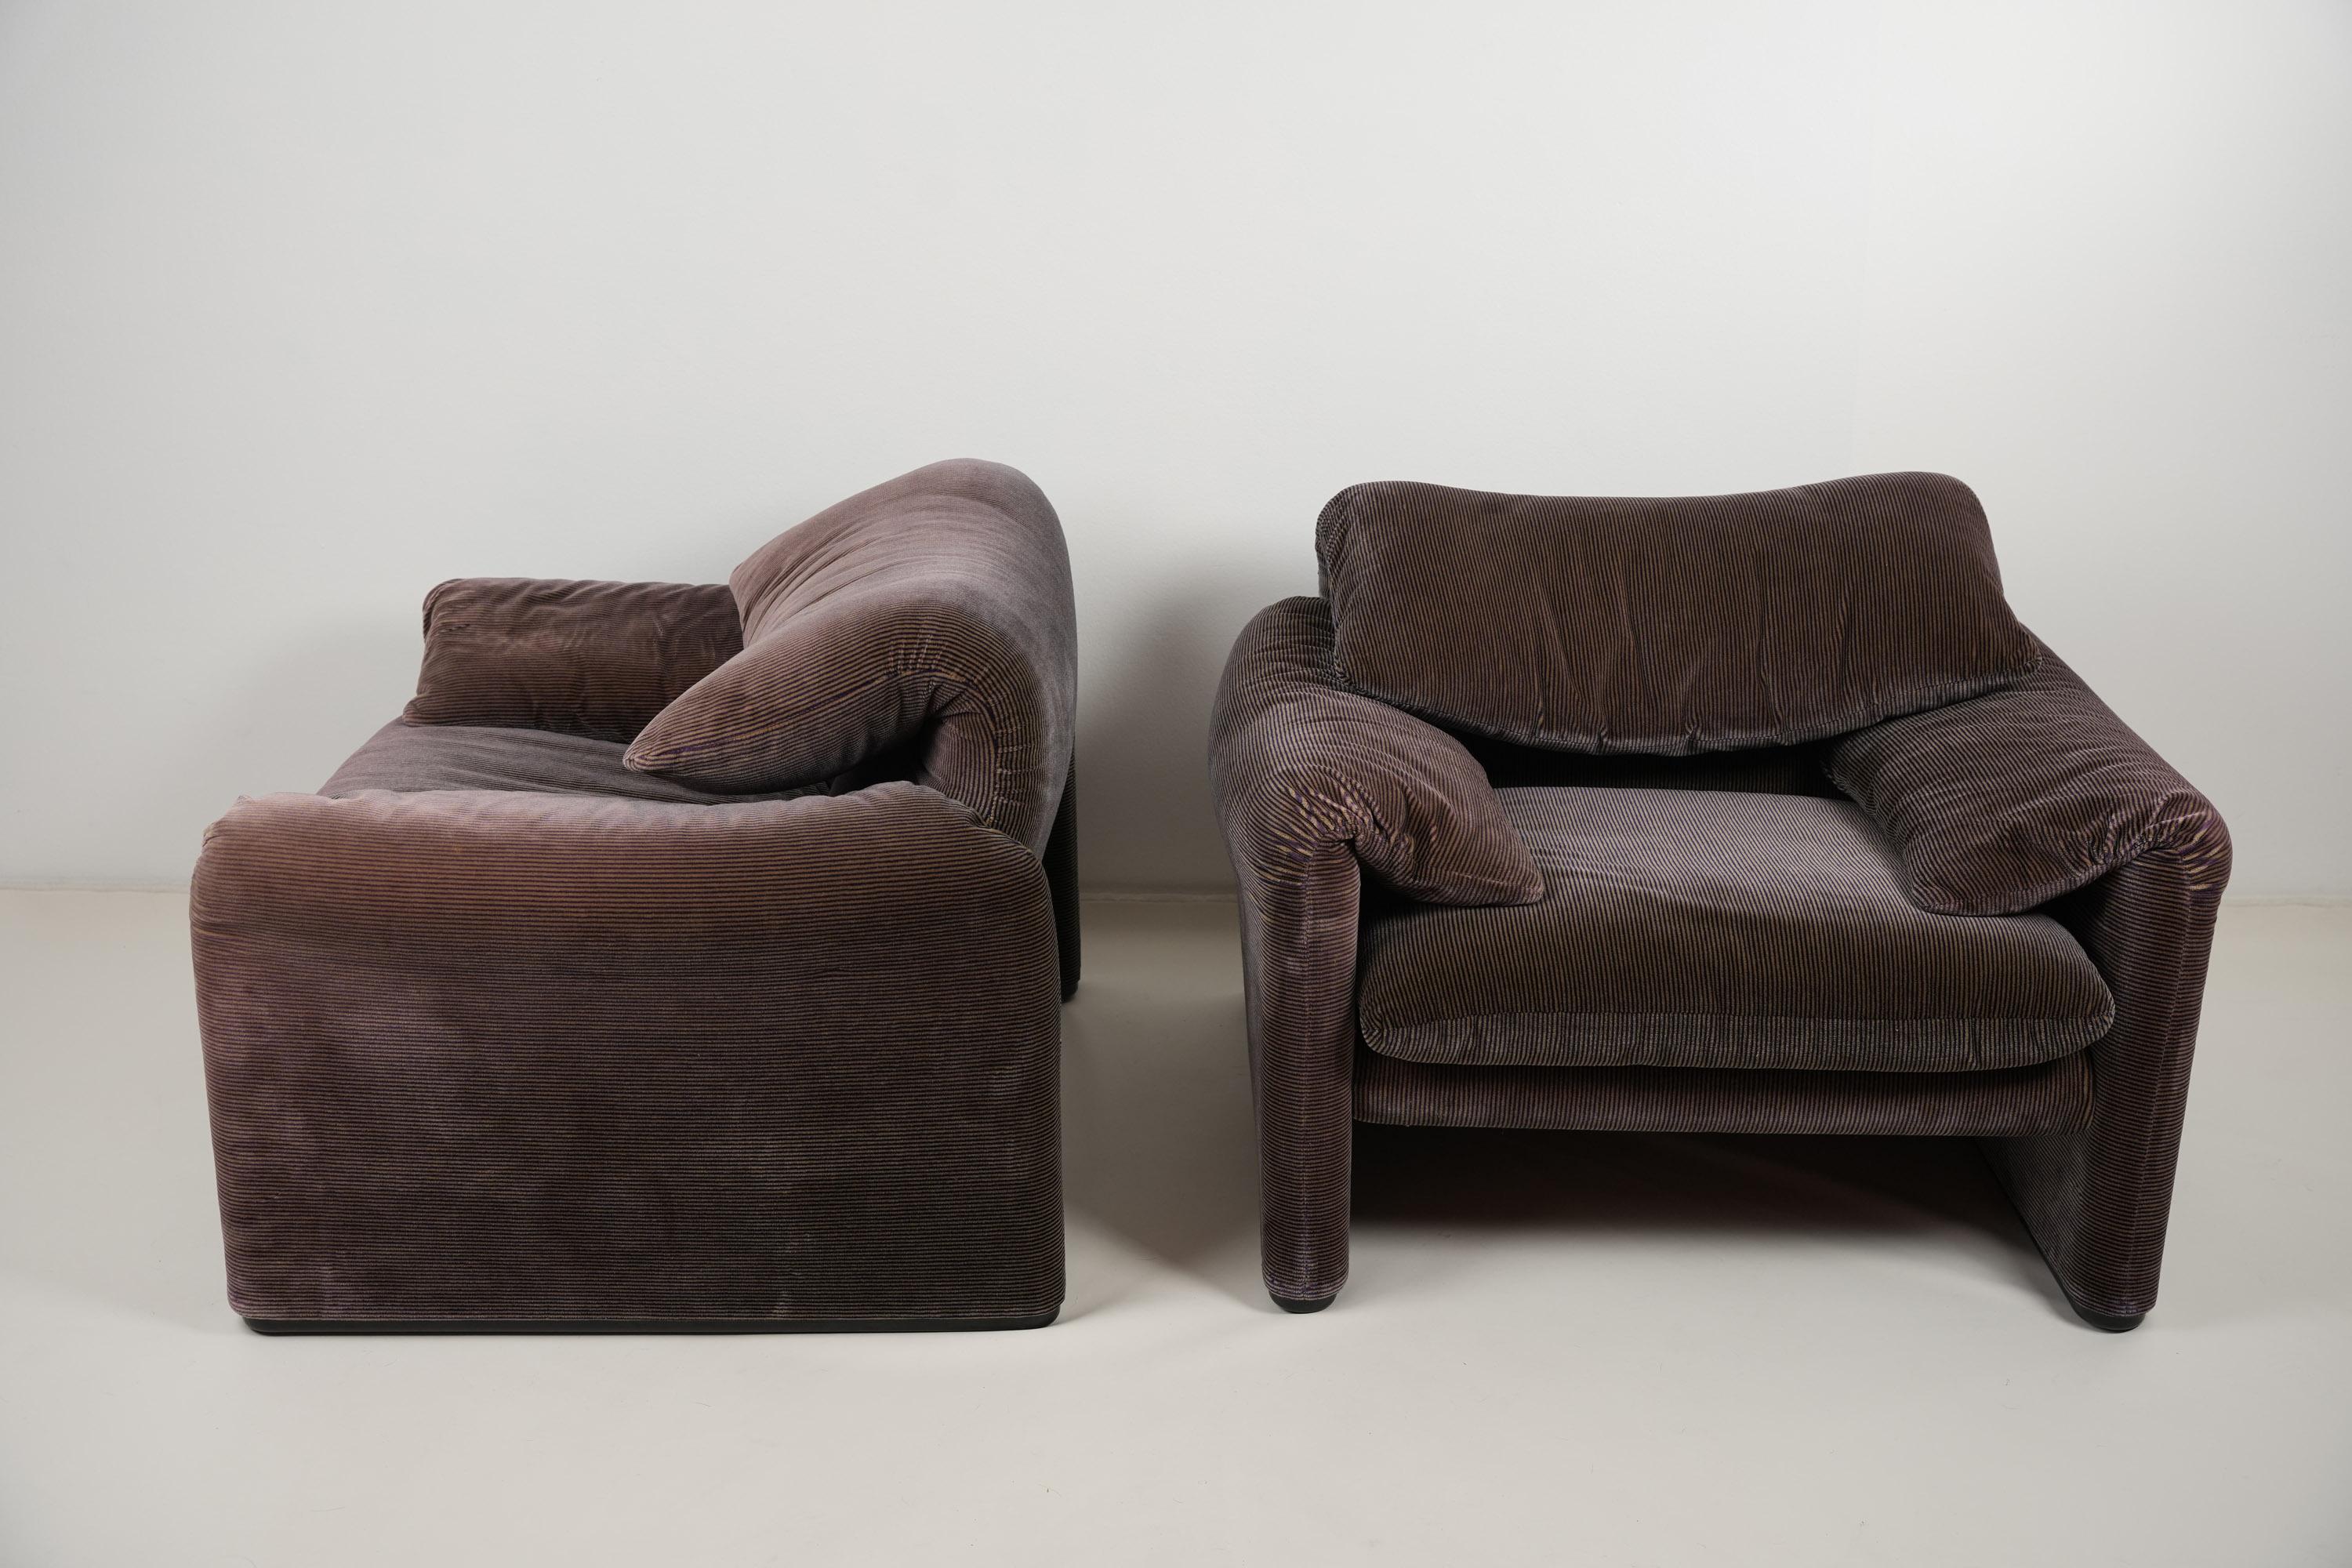 Italian Set of Two Maralunga Longue Chair By Vico Magistretti for Cassina 1970s For Sale